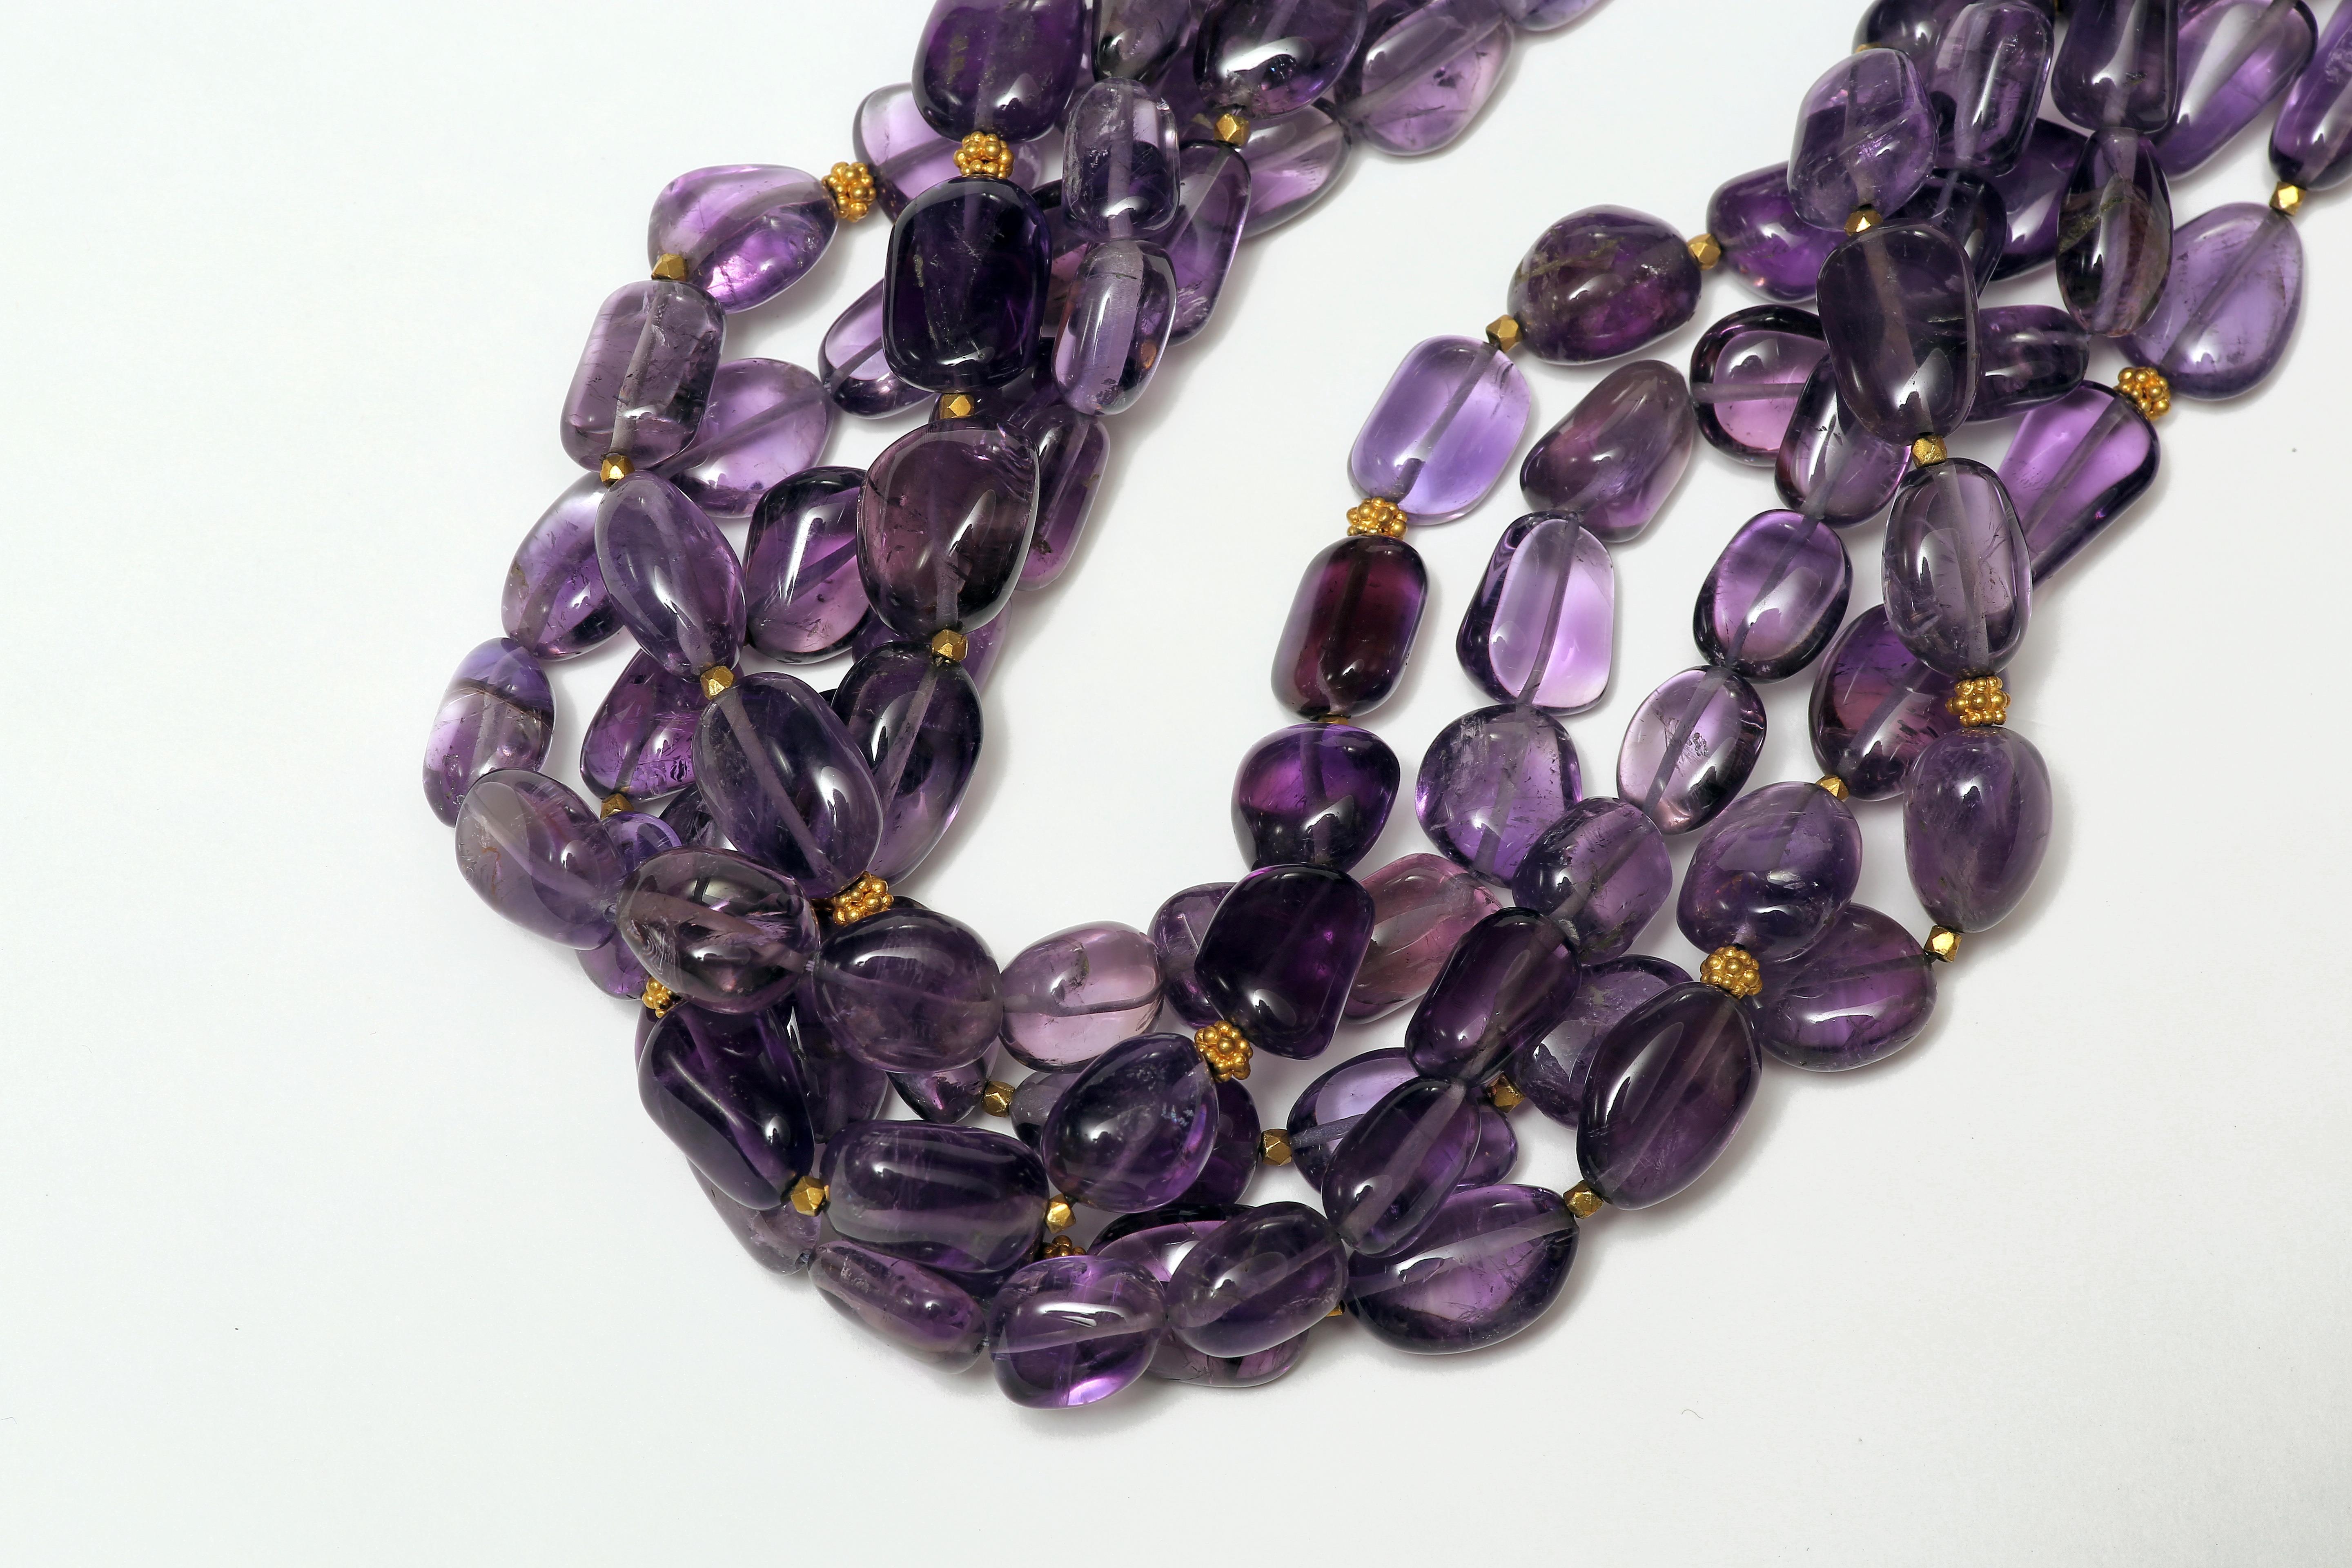 Five strings of amethyst, with scattered faceted gold beads spaced to catch the light, and an 18k gold toggle and ring clasp. They intertwine and twist to form this elegant necklace. Amethyst is believed to have the power of protection and to